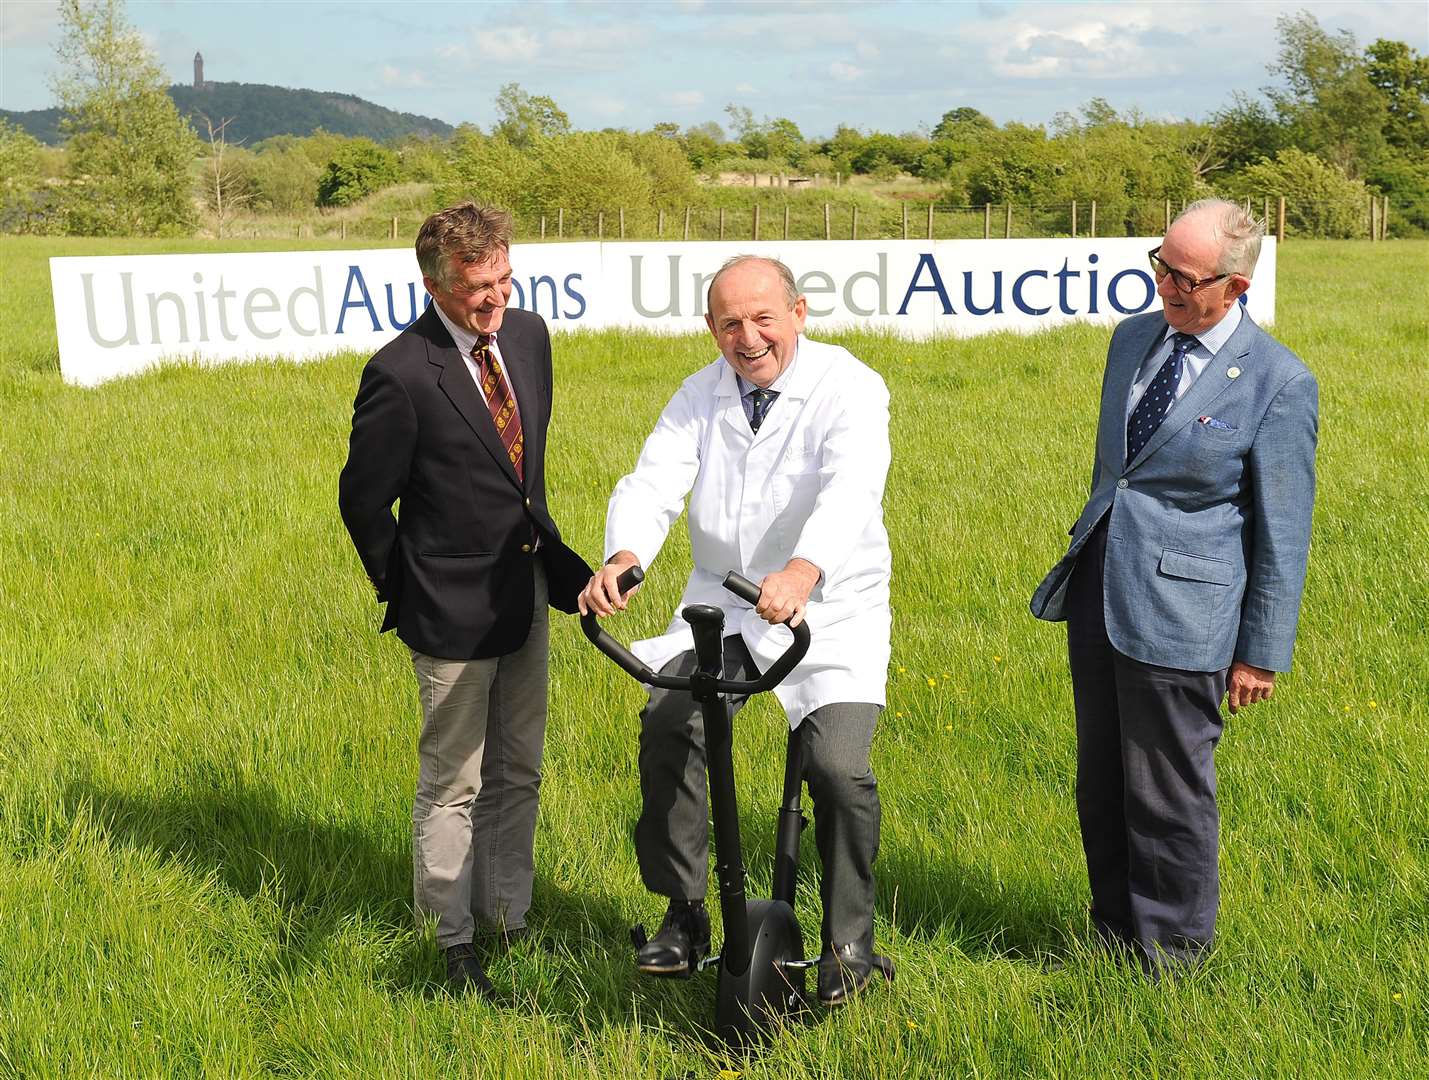 RSABI vice chair Jimmy McLean, United Auctions managing director George Purvis and RSABI chair David Leggat